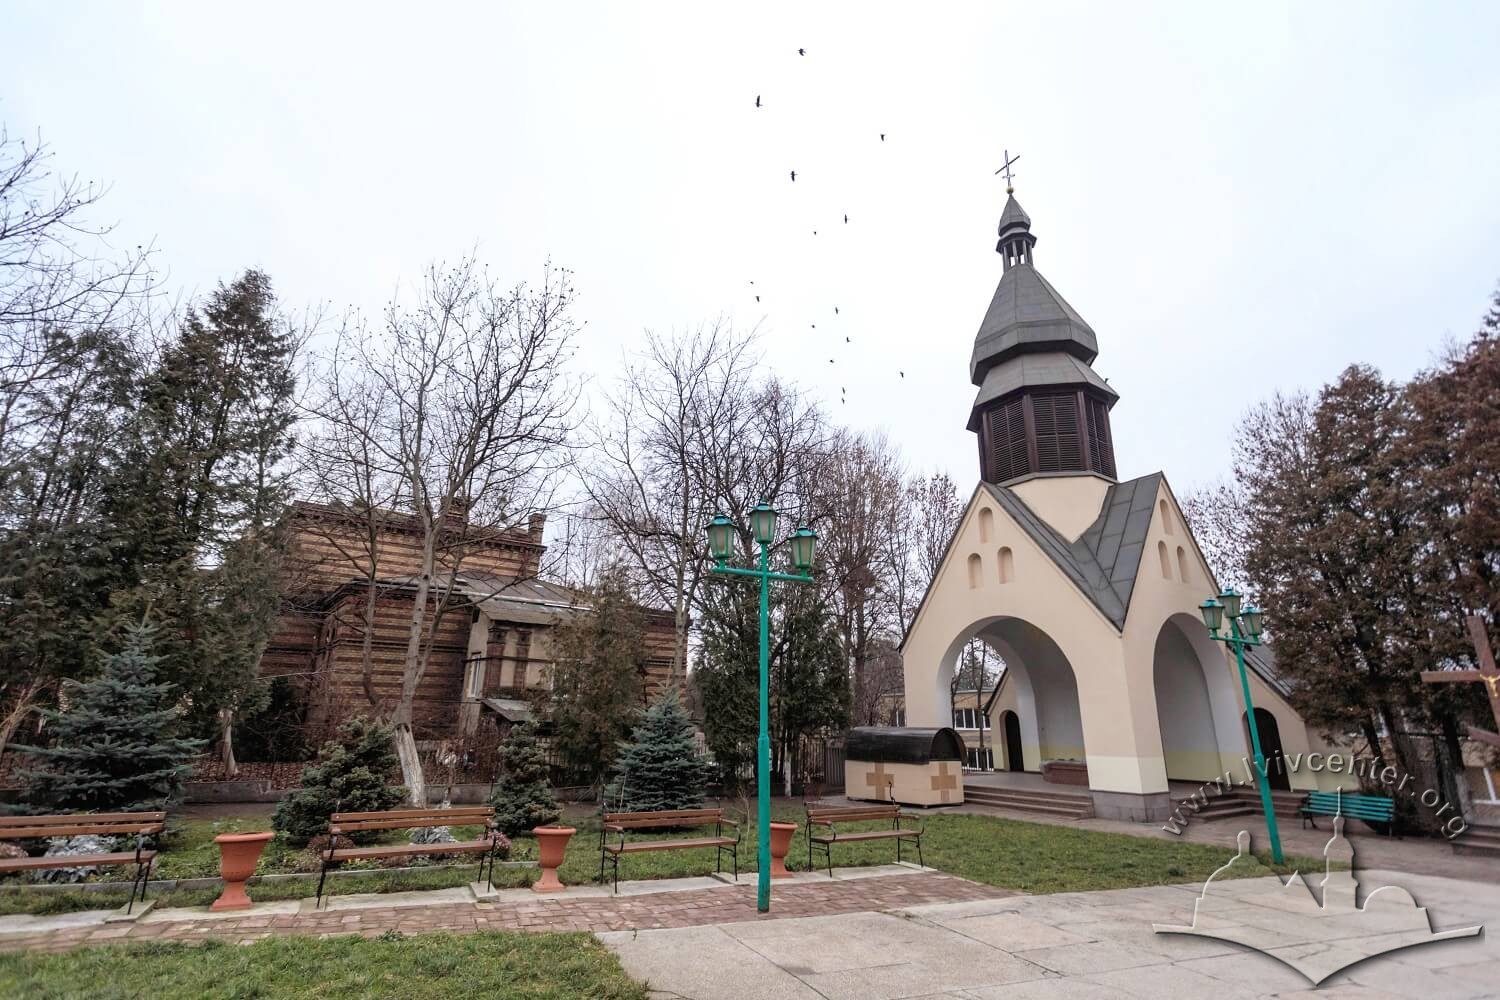 Vul. Khmelnytskoho, 77. Modern chapel located to the northwest of the church. Late 19th c. clergy house is seen on the left, it is derelict today/Photo courtesy of Nazarii Parkhomyk, 2015